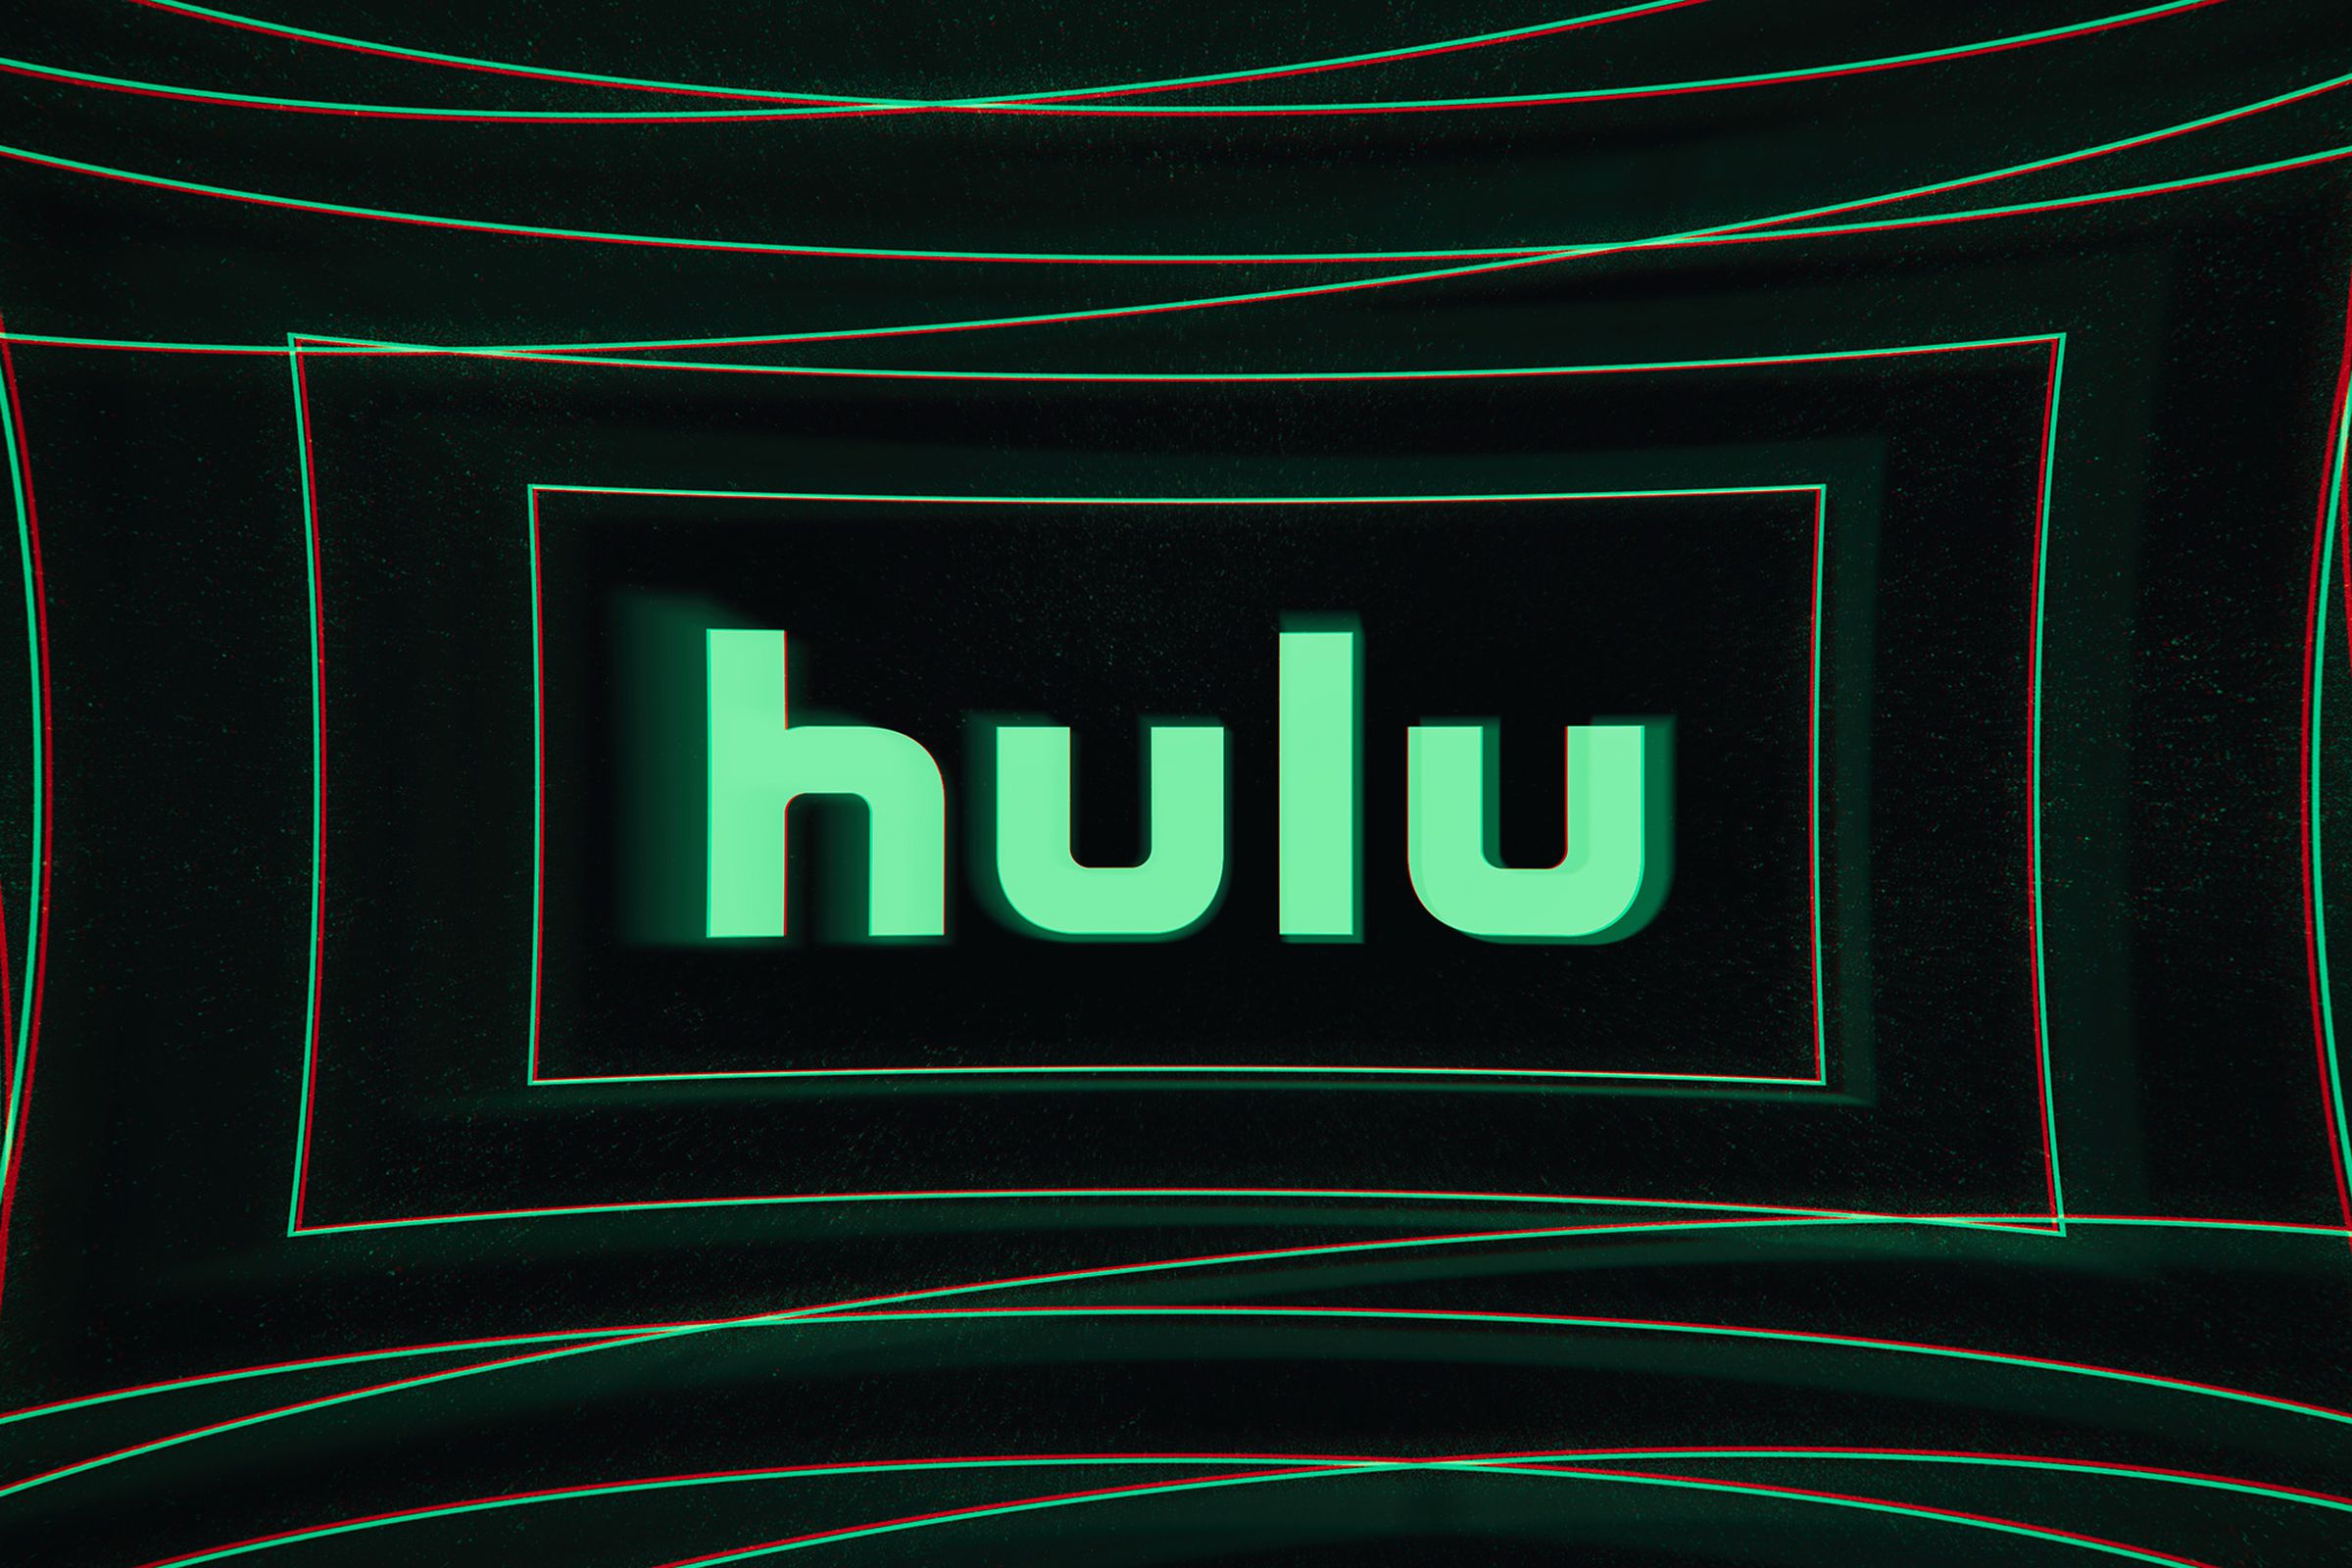 Many can enjoy one year of Hulu’s ad-supported streaming service for just $1 per month.